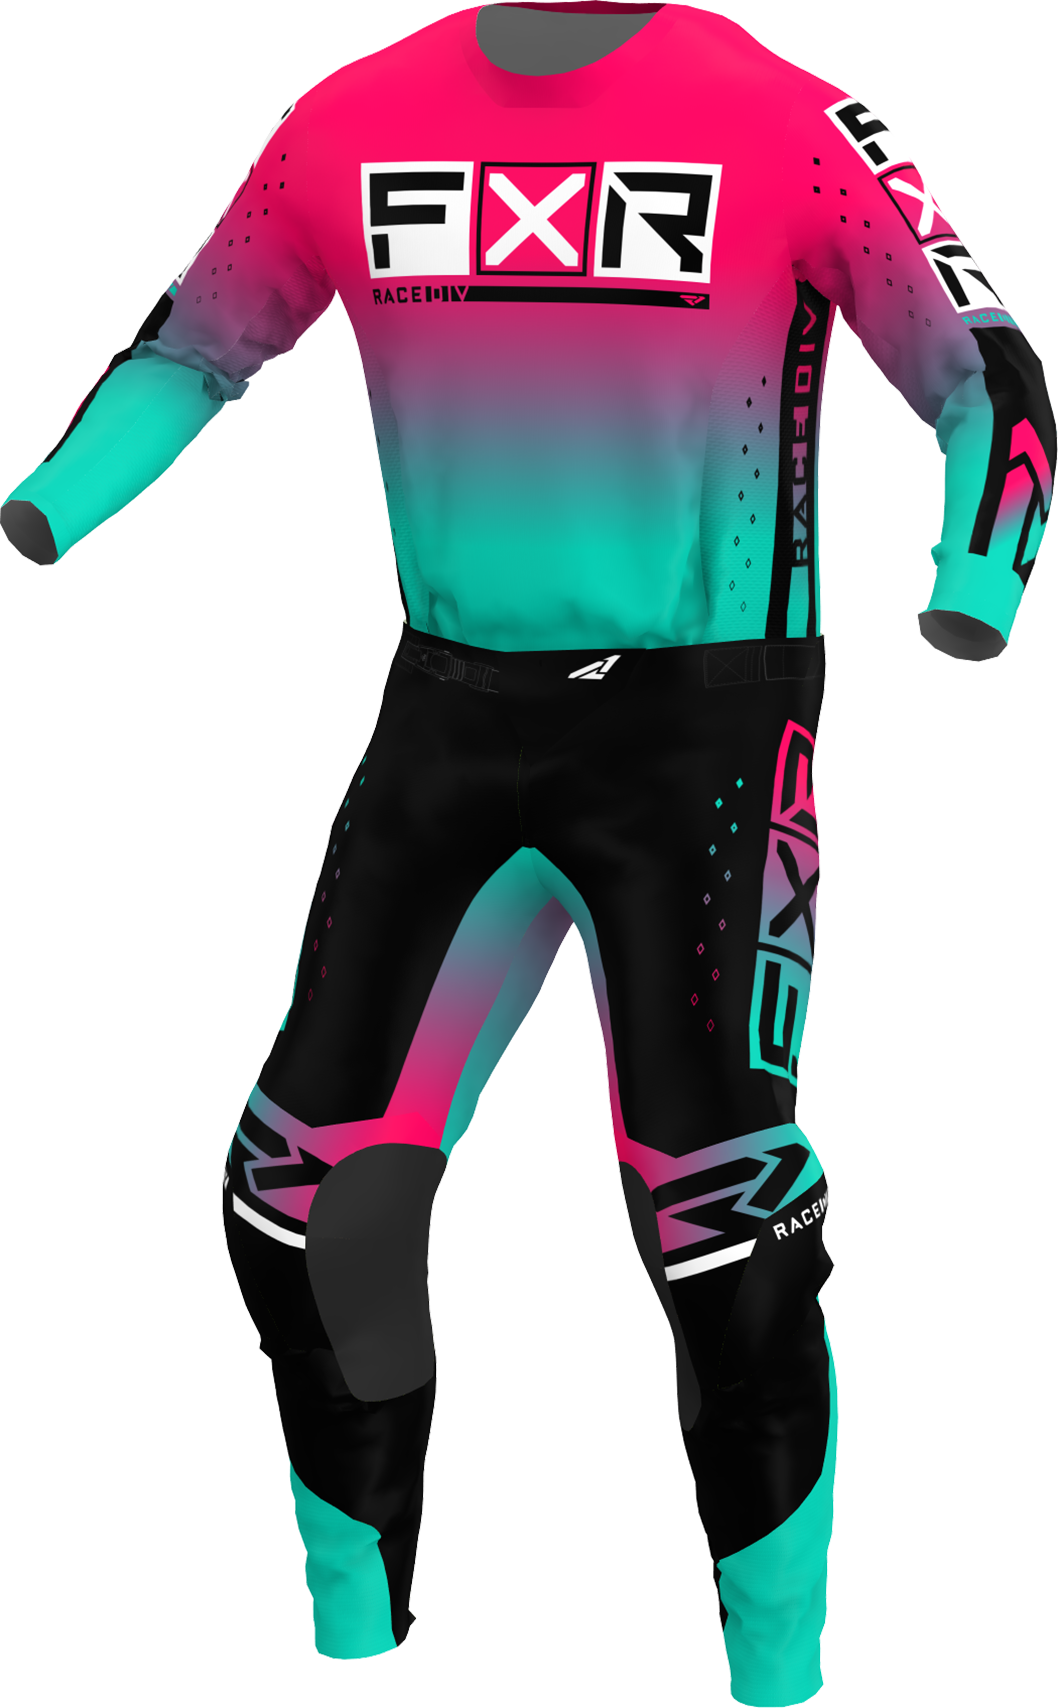 A 3D image of FXR's Podium Pro MX Jersey and Pant in Minty Re-Fresh/Coral colorway